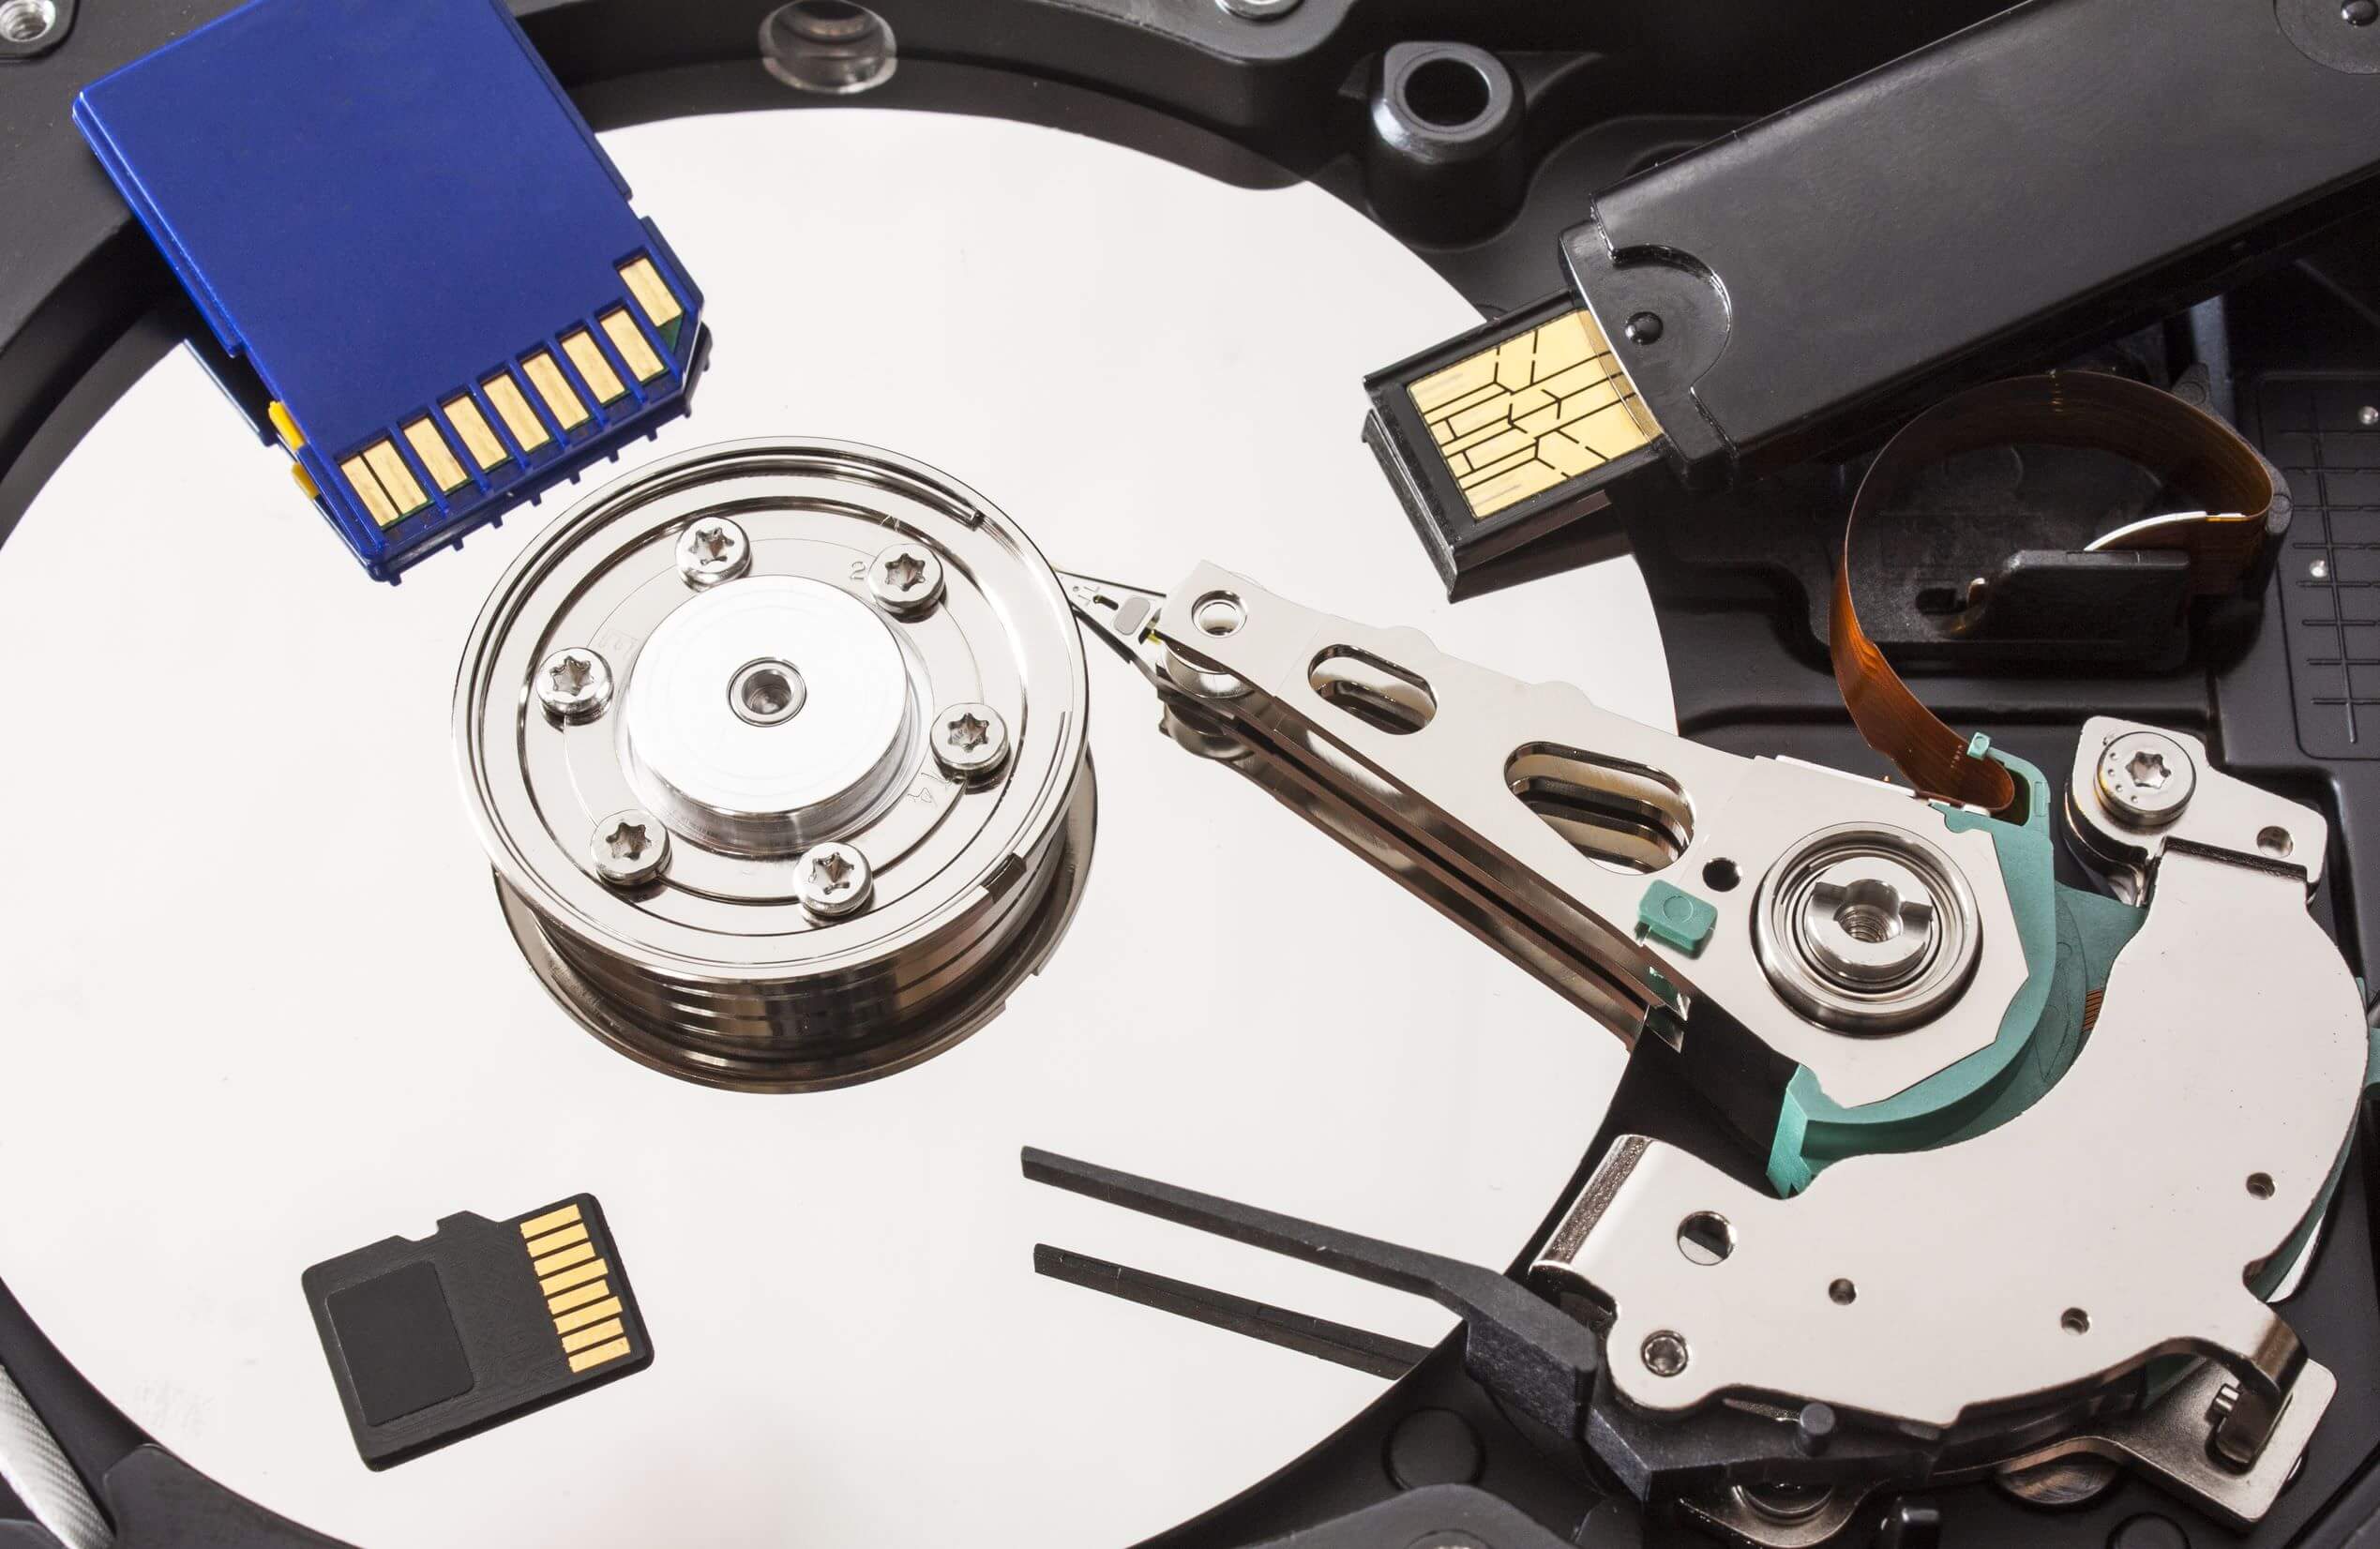 How Much Does Data Recovery Services Cost?